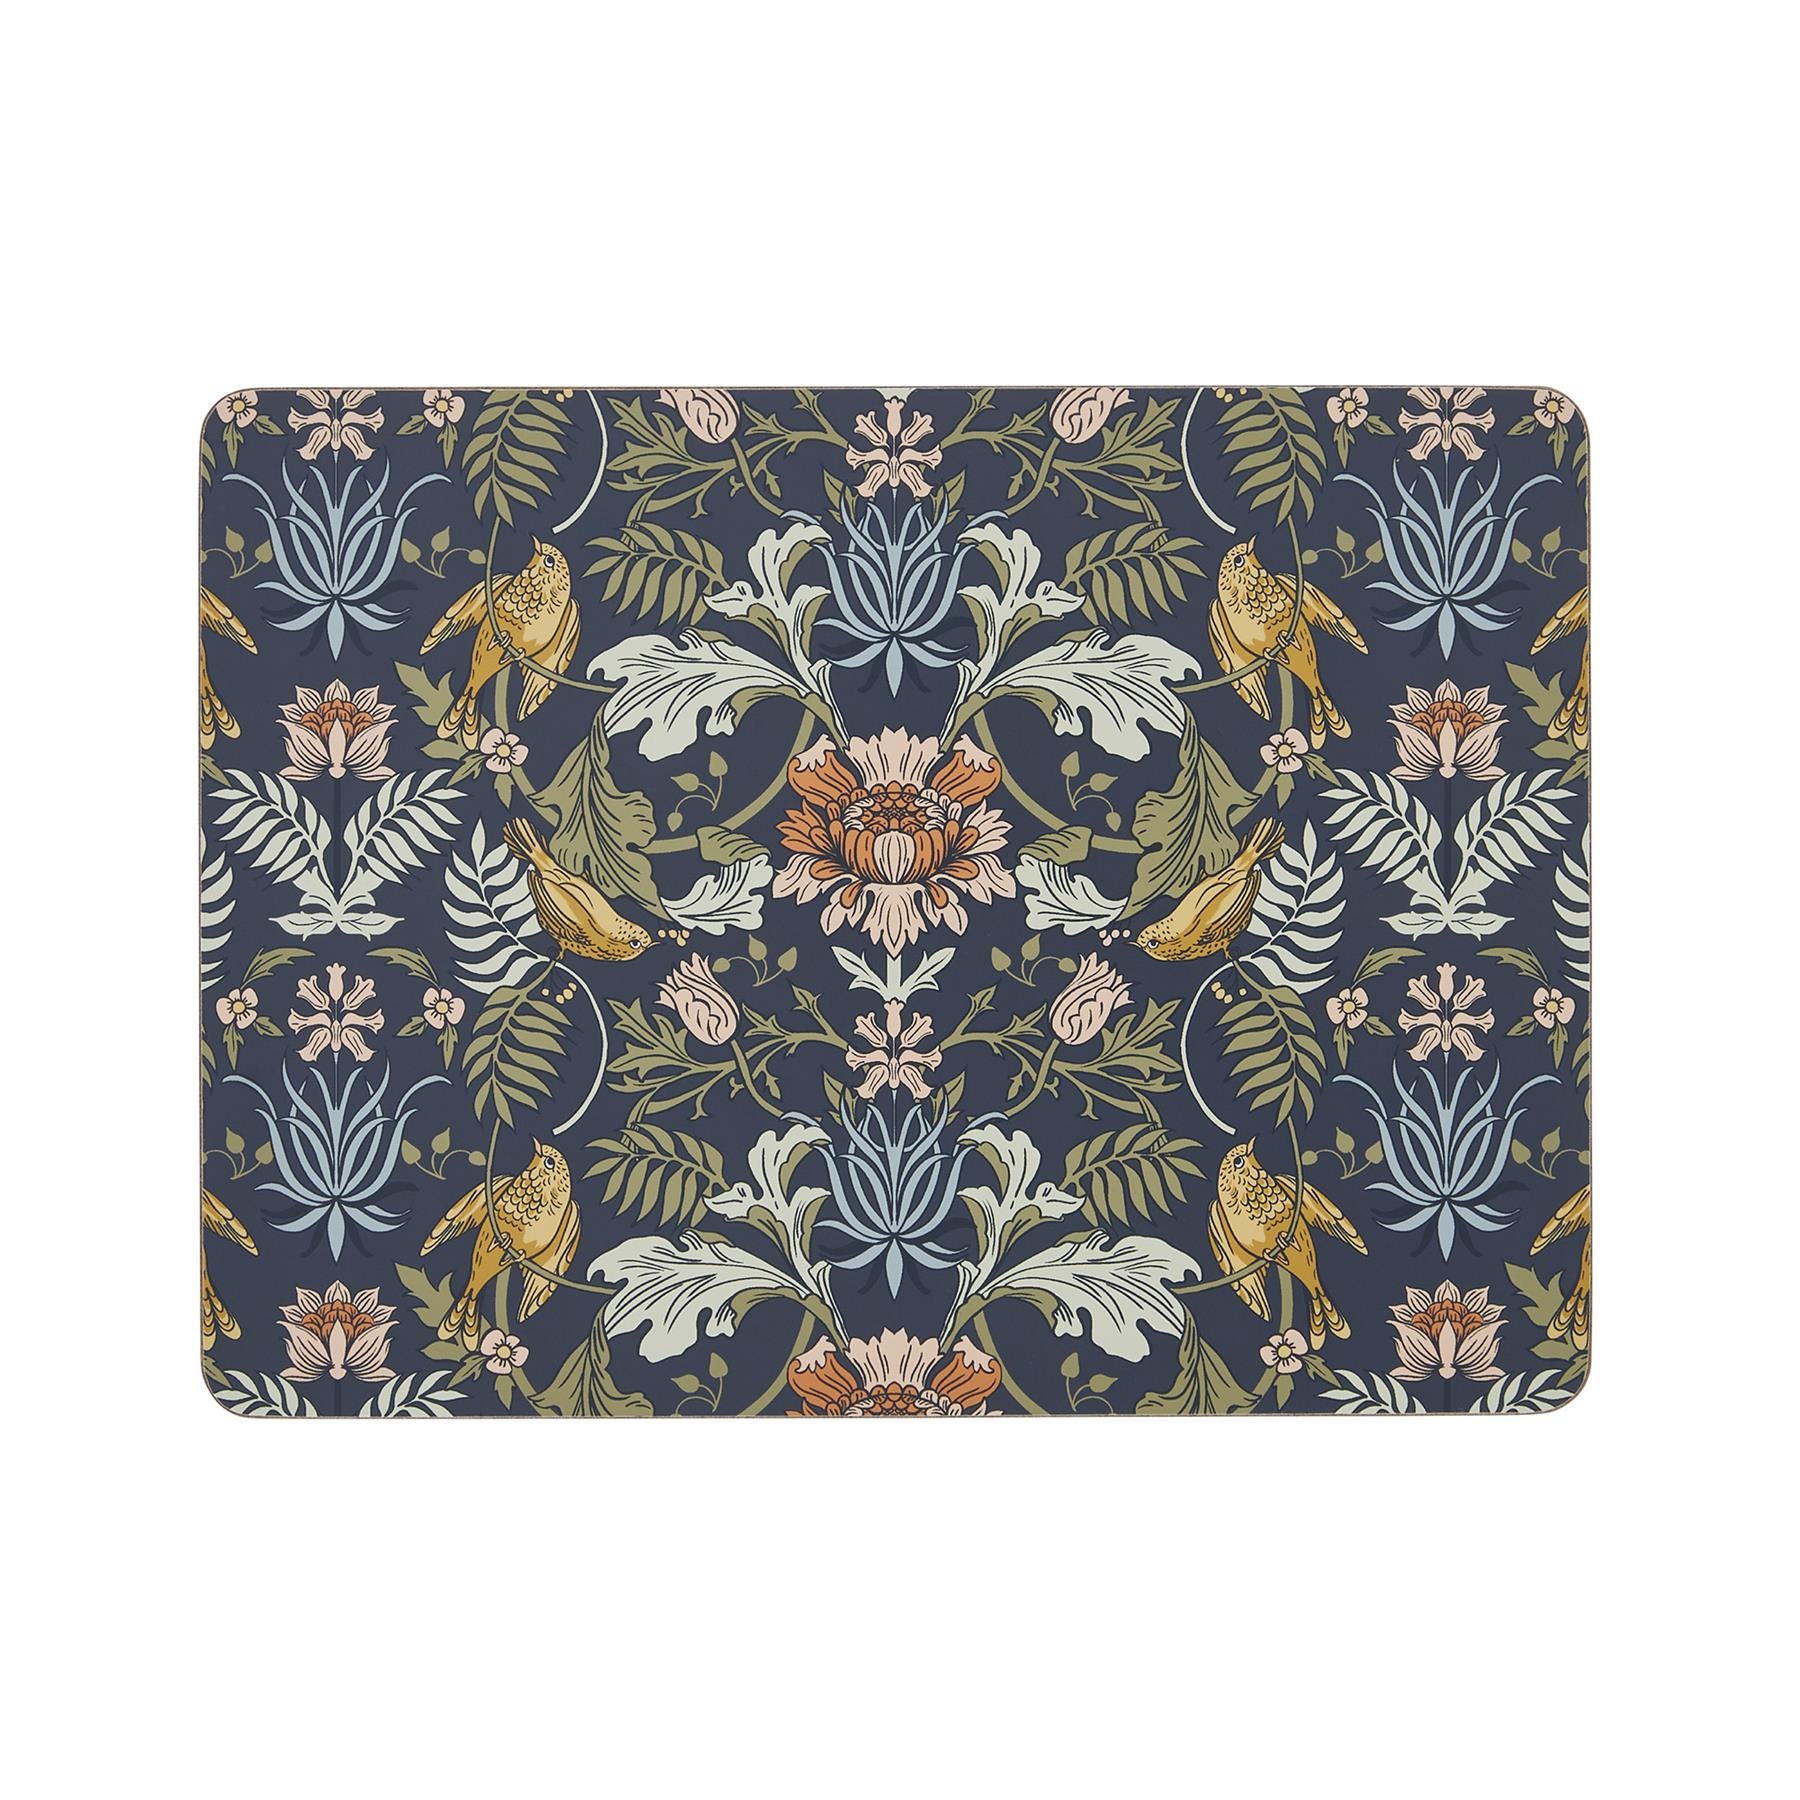 Ulster Weavers Finch and Flower Placemat & Coaster (Set of 4)